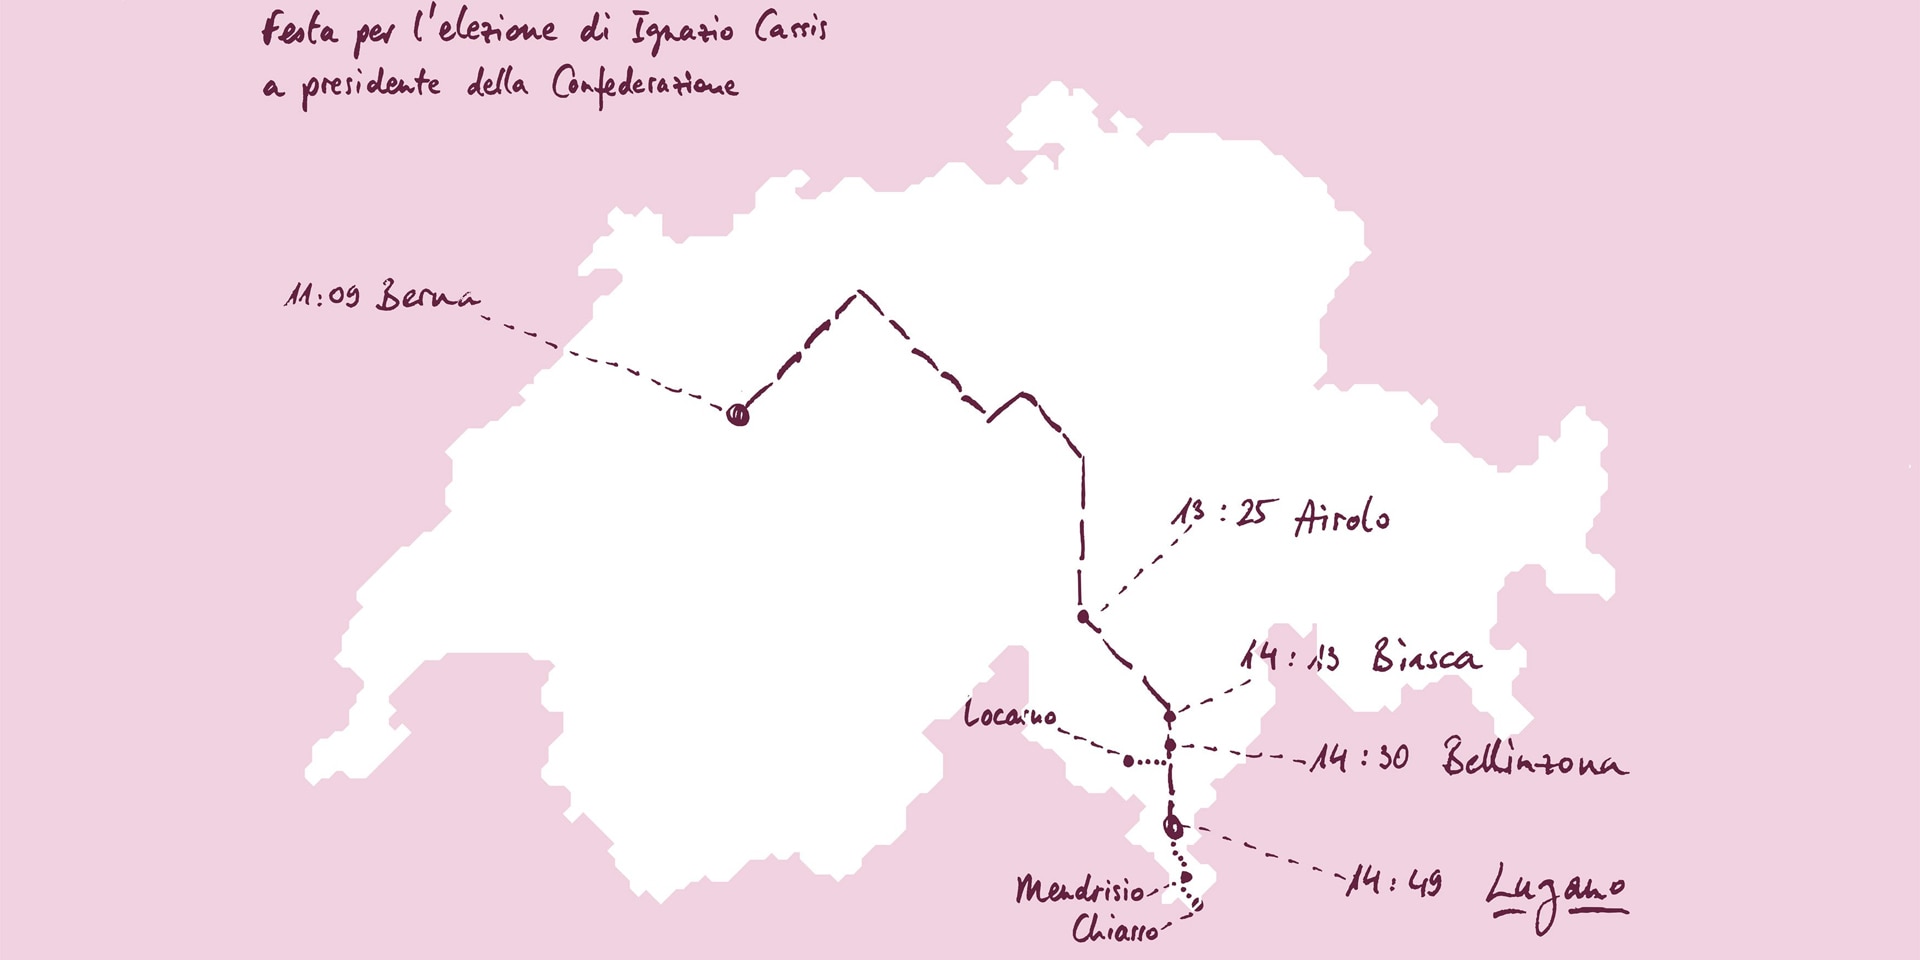 A map of Switzerland shows the route of President Cassis' trip as well as the municipalities that participate in the celebrations.